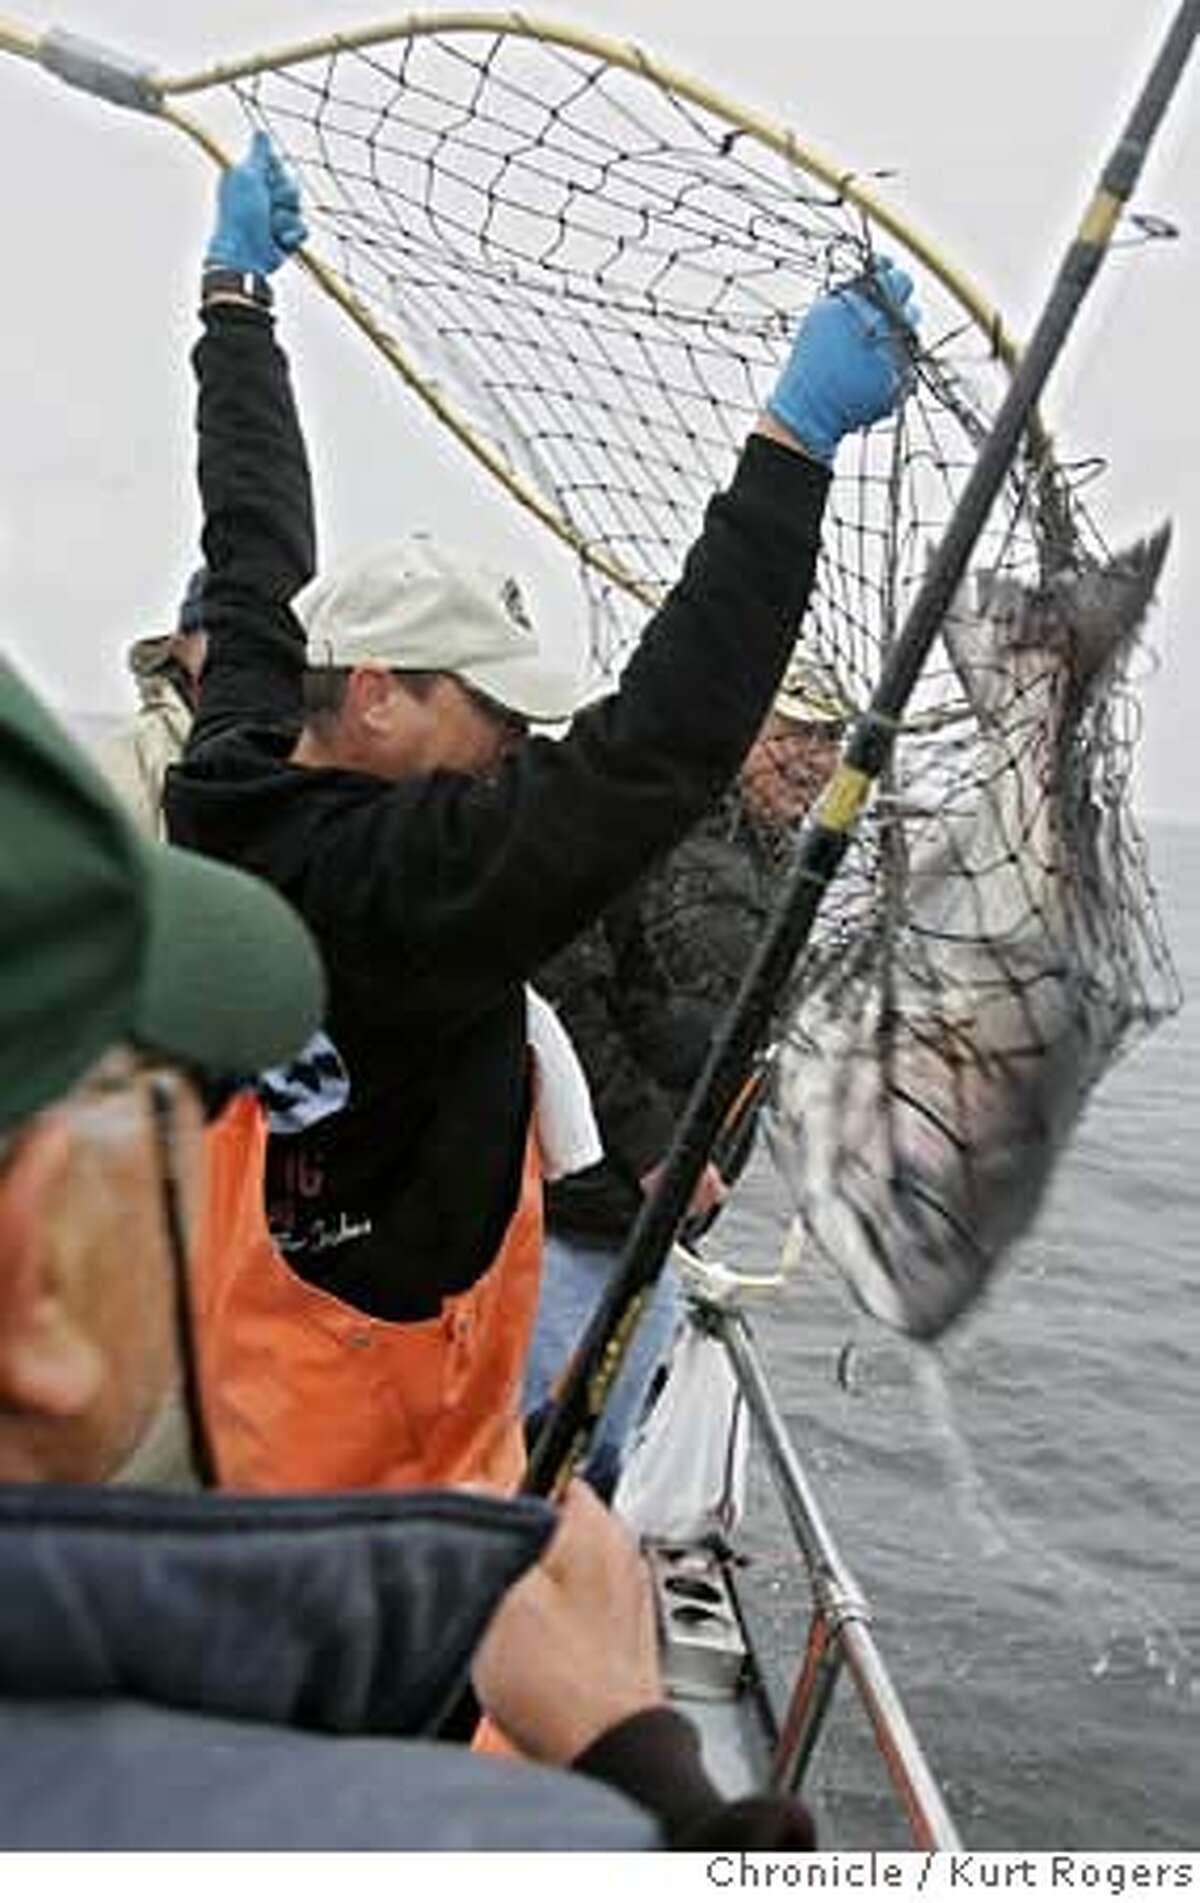 Tom Brenot halls in this 22 pound Salmon for Tukio Manabe in who in in the foreground. Opening day for recreational salmon season. SATURDAY, APRIL 7, 2007 KURT ROGERS SAN FRANCISCO THE CHRONICLE KURT ROGERS/THE CHRONICLE SALMON_0214_kr.jpg MANDATORY CREDIT FOR PHOTOG AND SF CHRONICLE / NO SALES-MAGS OUT